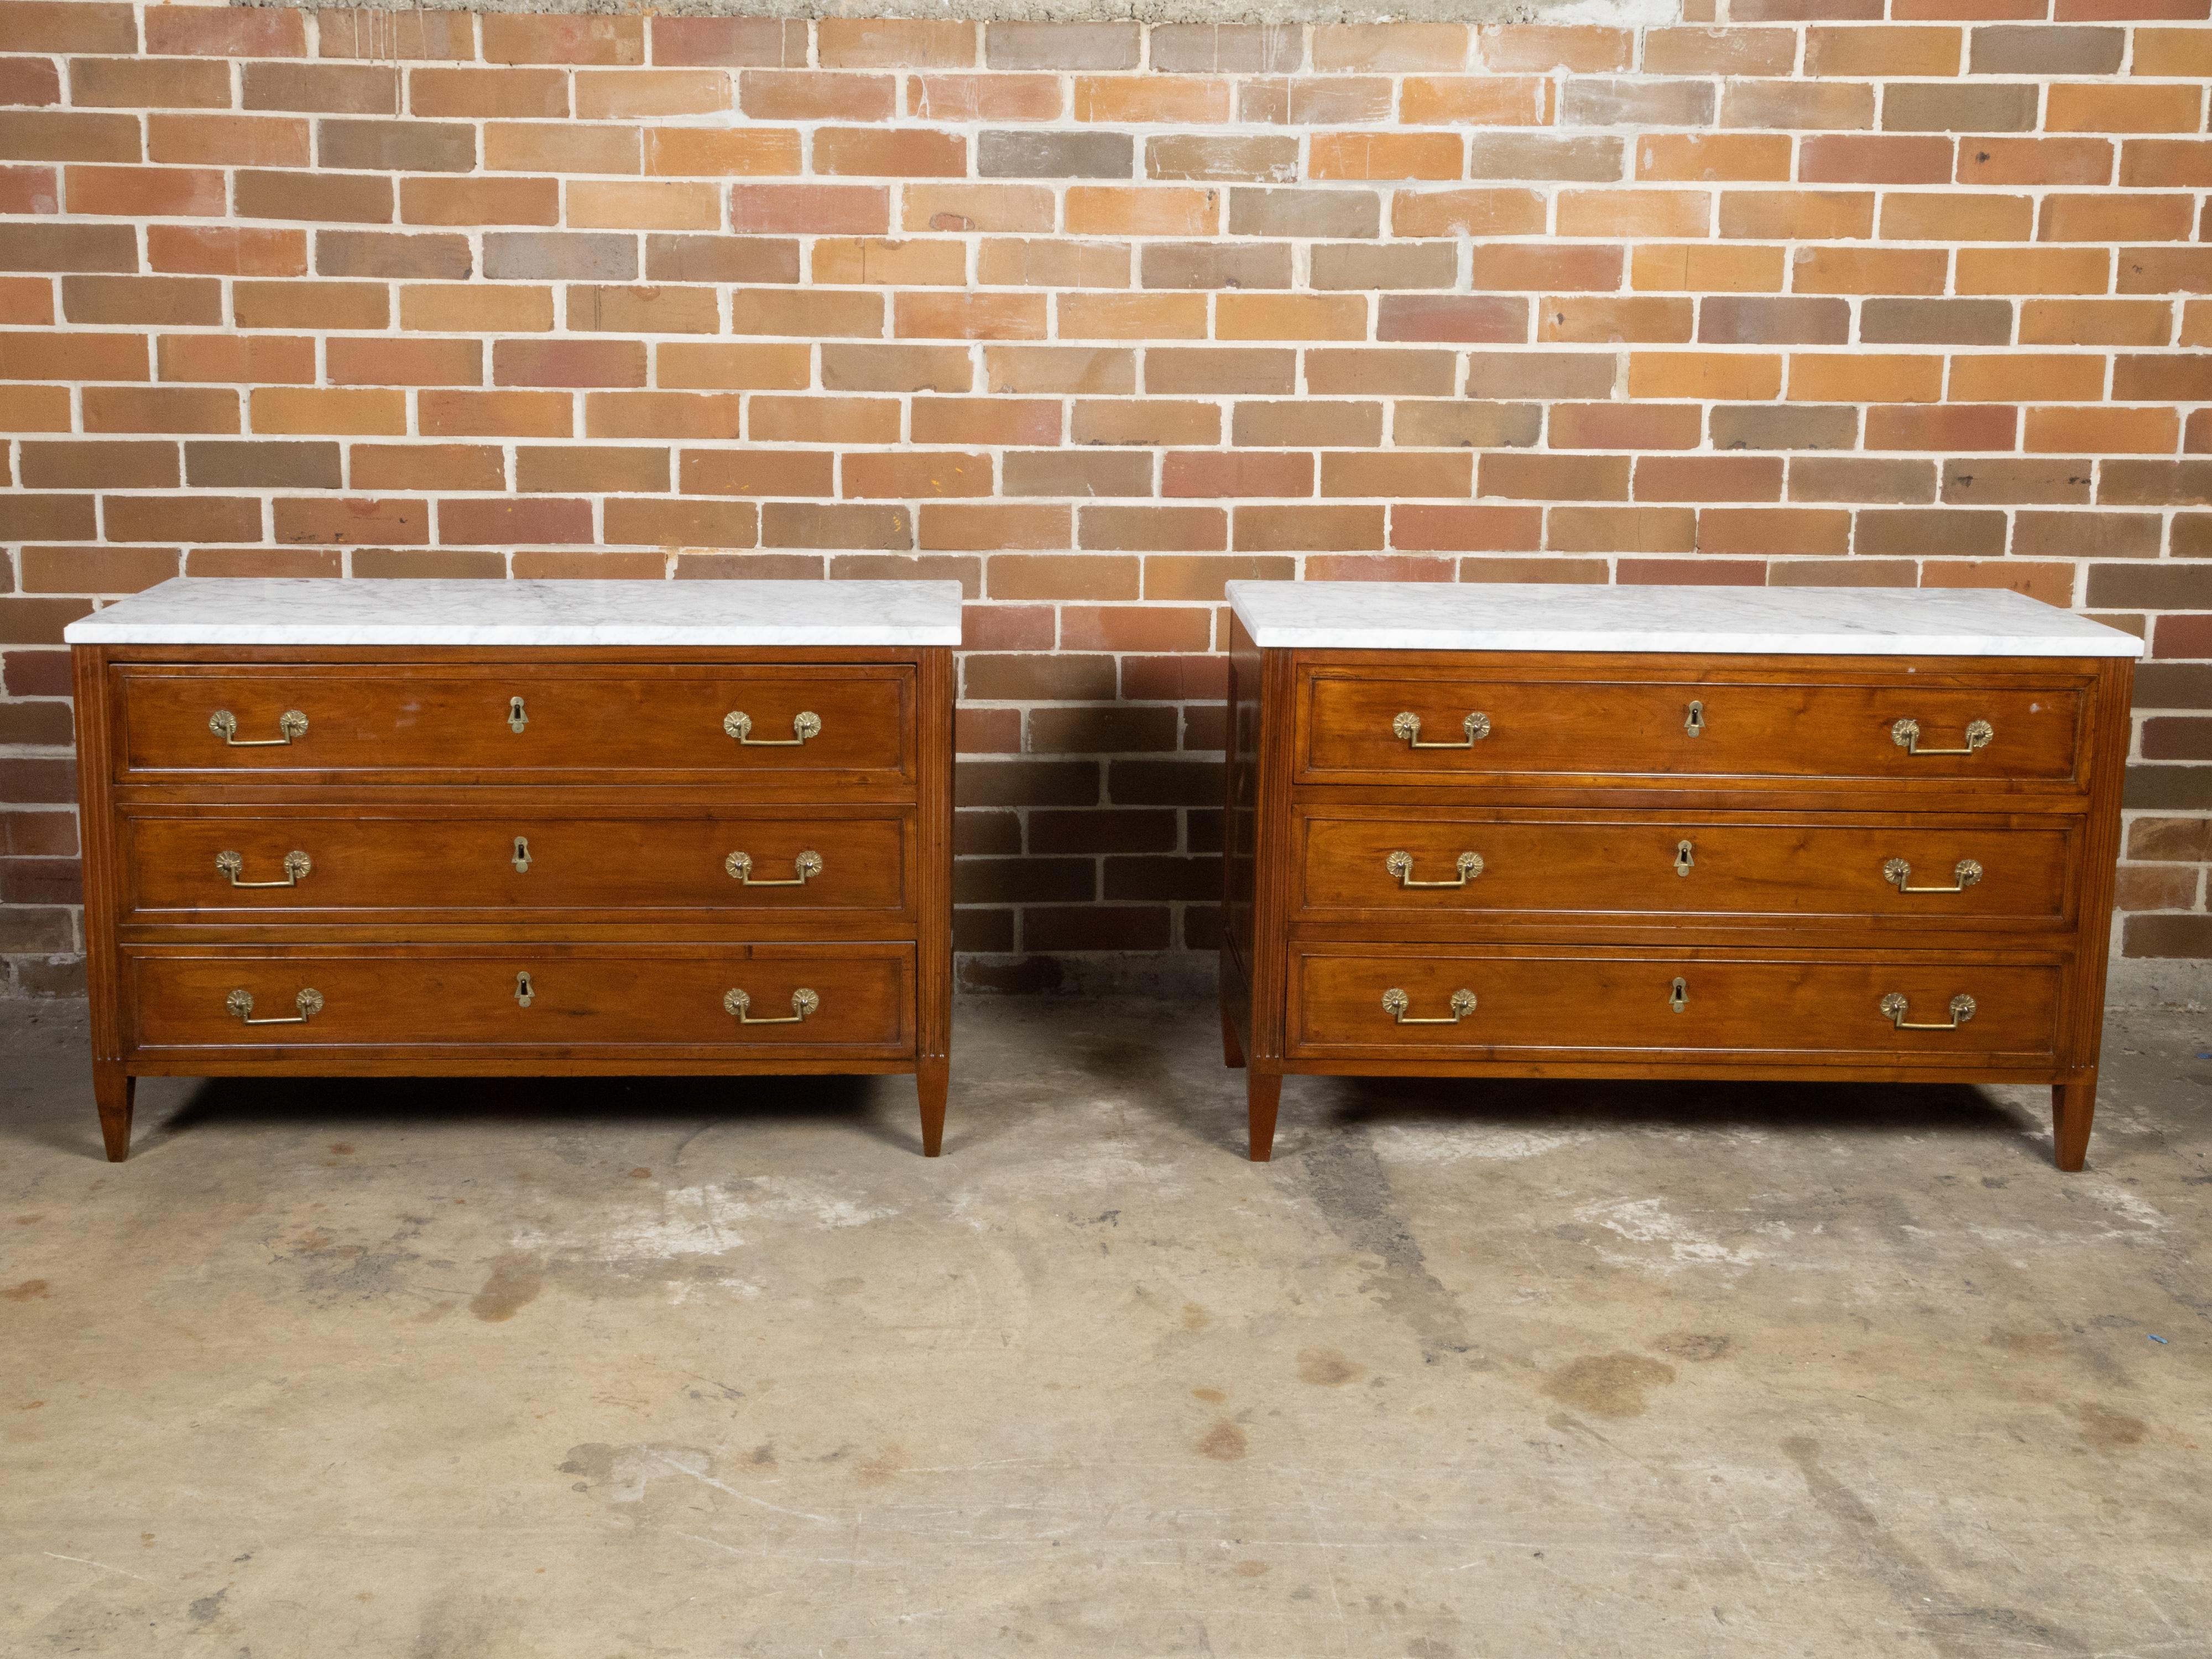 A pair of French Neoclassical style walnut commodes from the 19th century, with white marble tops, three drawers, fluted side posts, tapered legs and brass hardware. Created in France during the 19th century, each of this pair of Neoclassical style